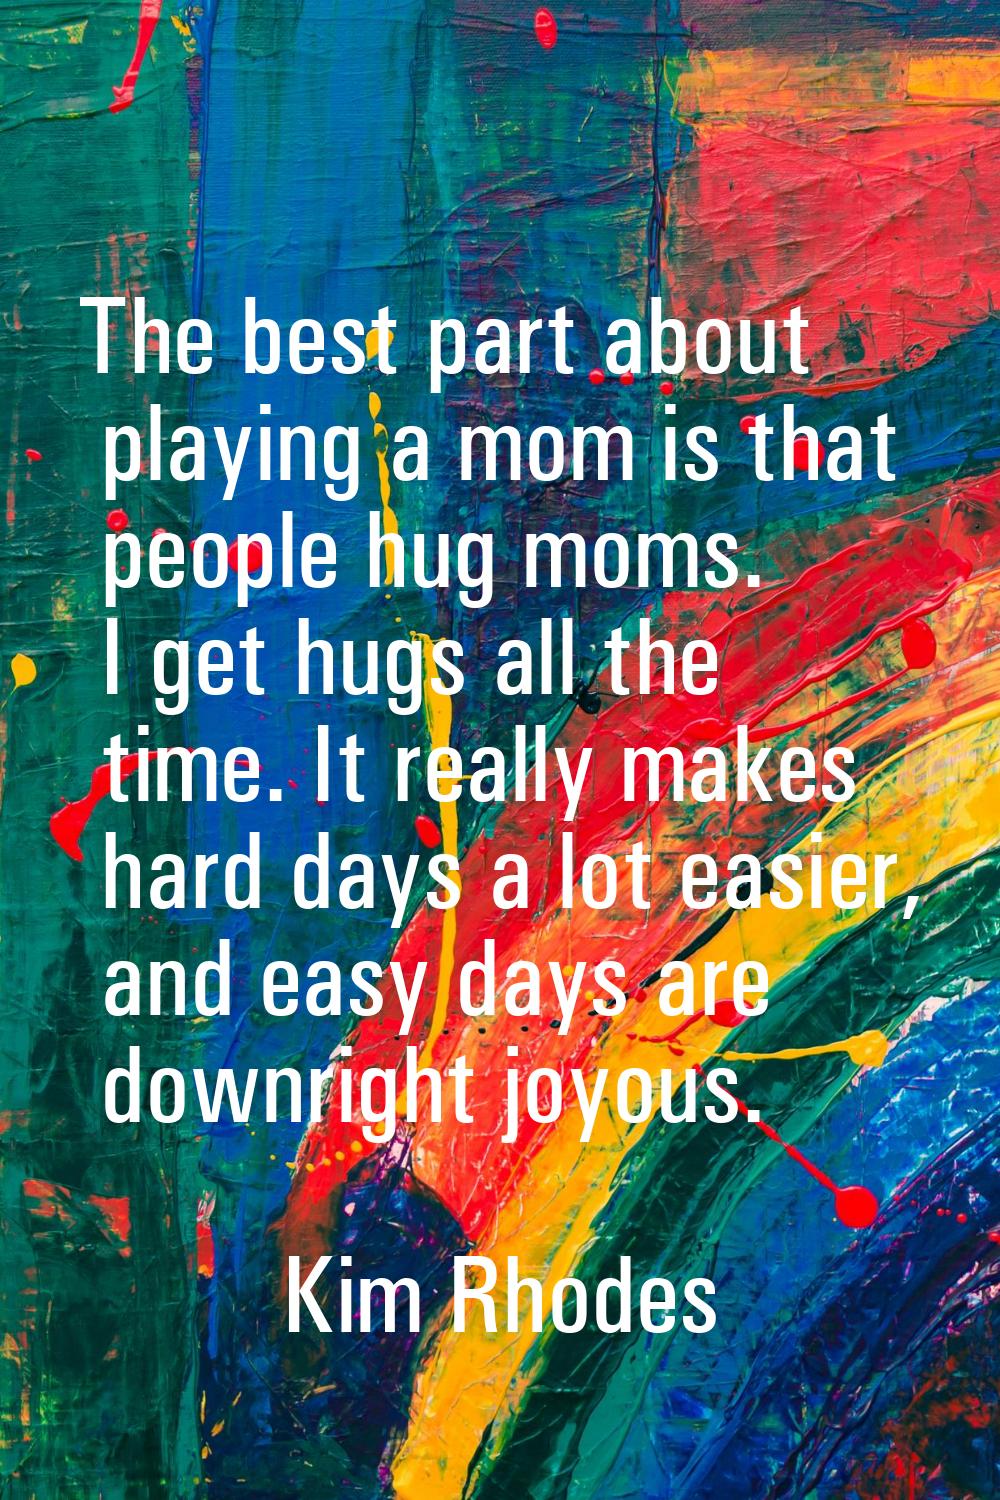 The best part about playing a mom is that people hug moms. I get hugs all the time. It really makes